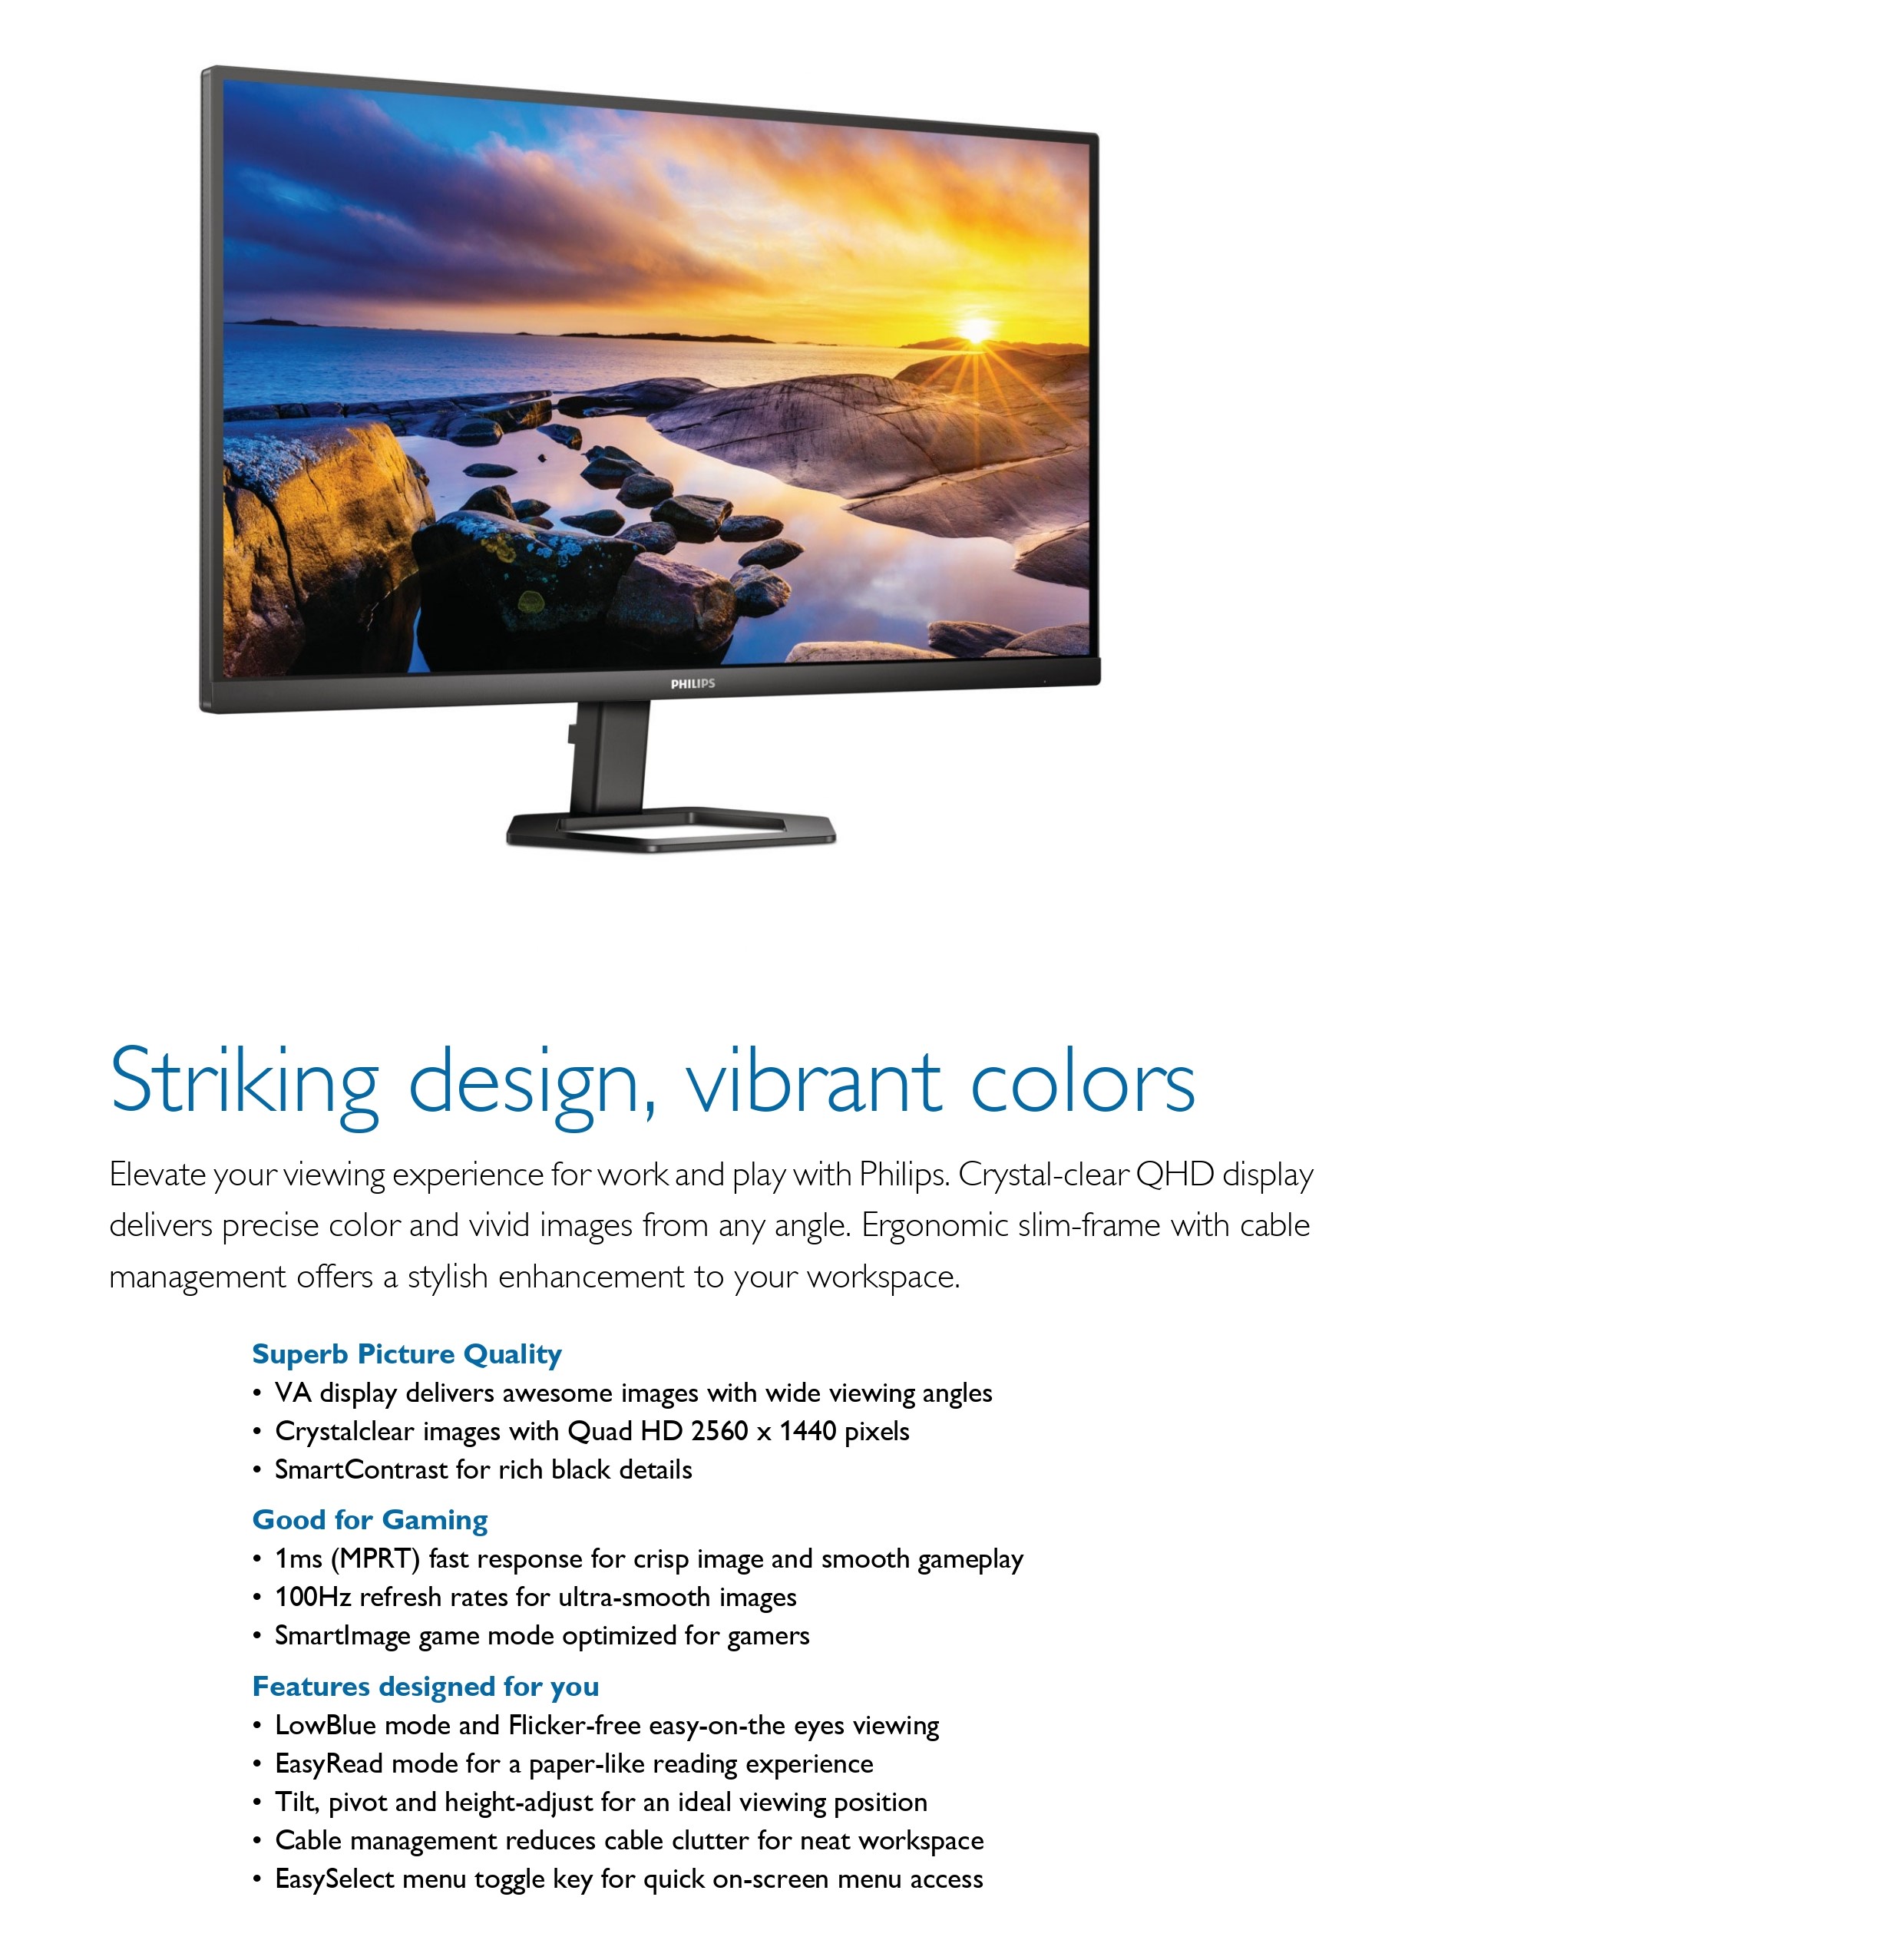 A large marketing image providing additional information about the product Philips 27E1N5500LB 27" QHD 100Hz VA Monitor - Additional alt info not provided